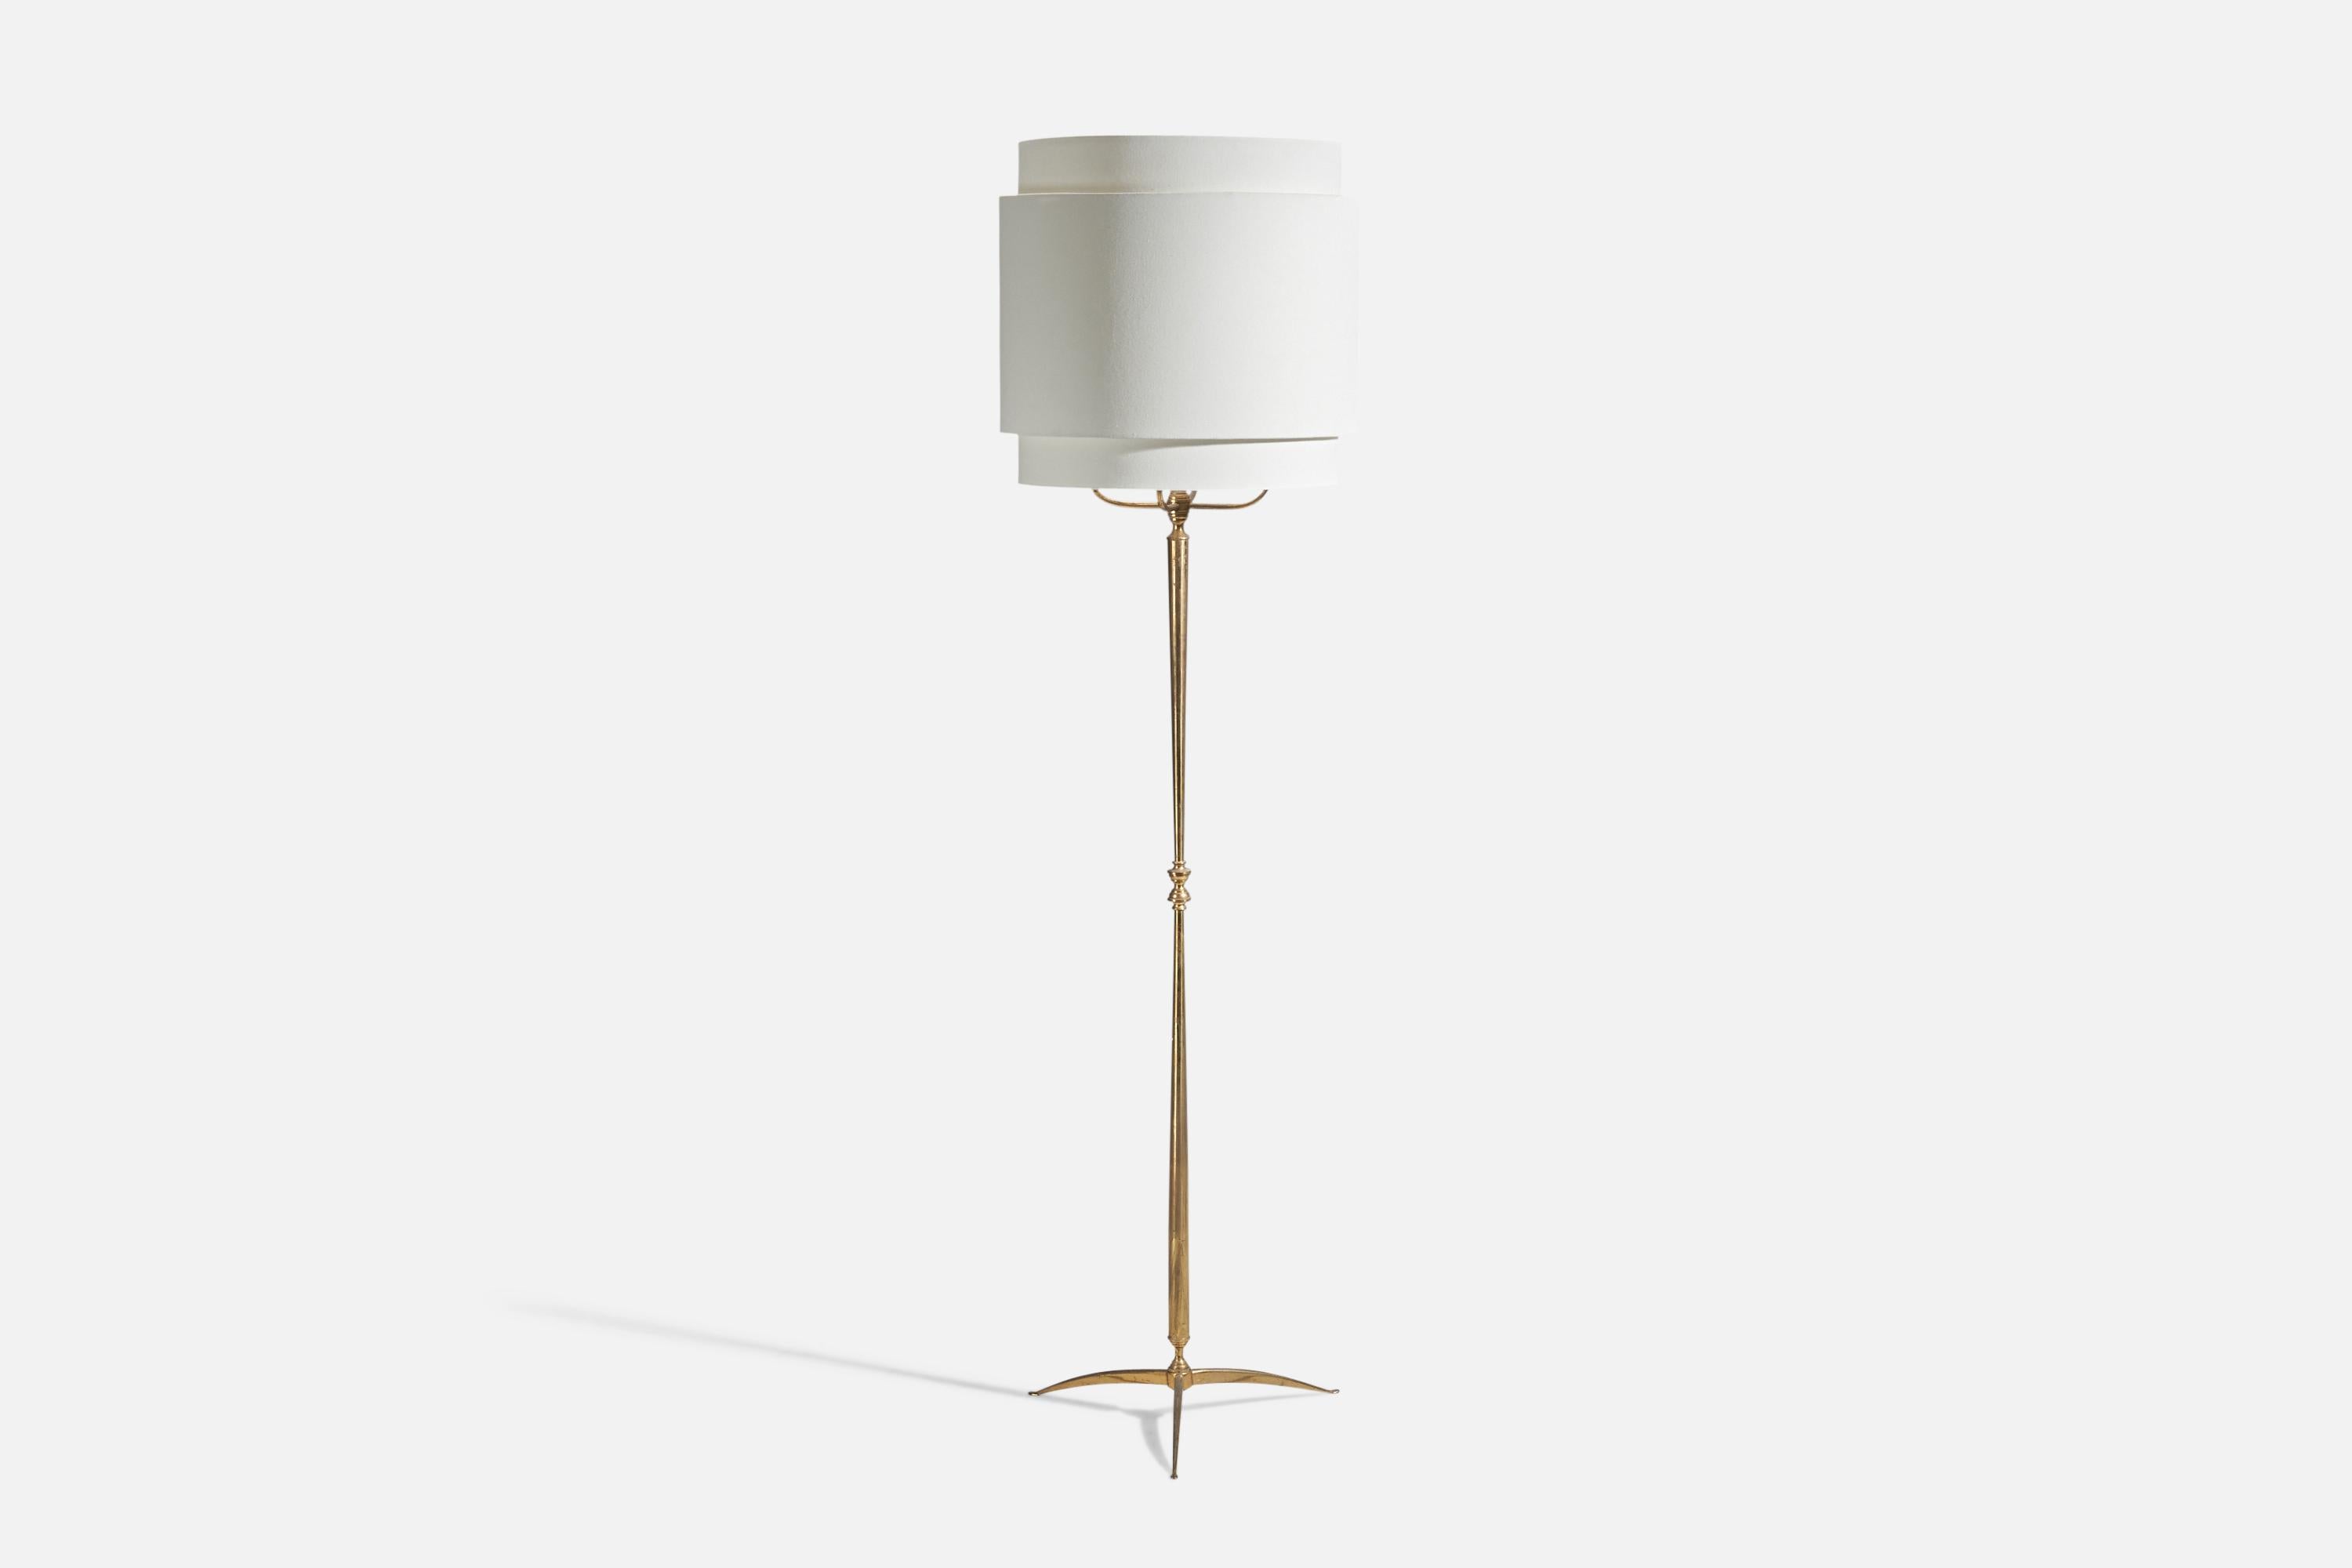 A brass and fabric floor lamp designed and produced in Italy, 1950s.

Sold with Lampshade. Dimensions stated are of Floor Lamp with Lampshade. 

4 light sources, E-14 sockets.

There is no maximum wattage stated on the fixture.